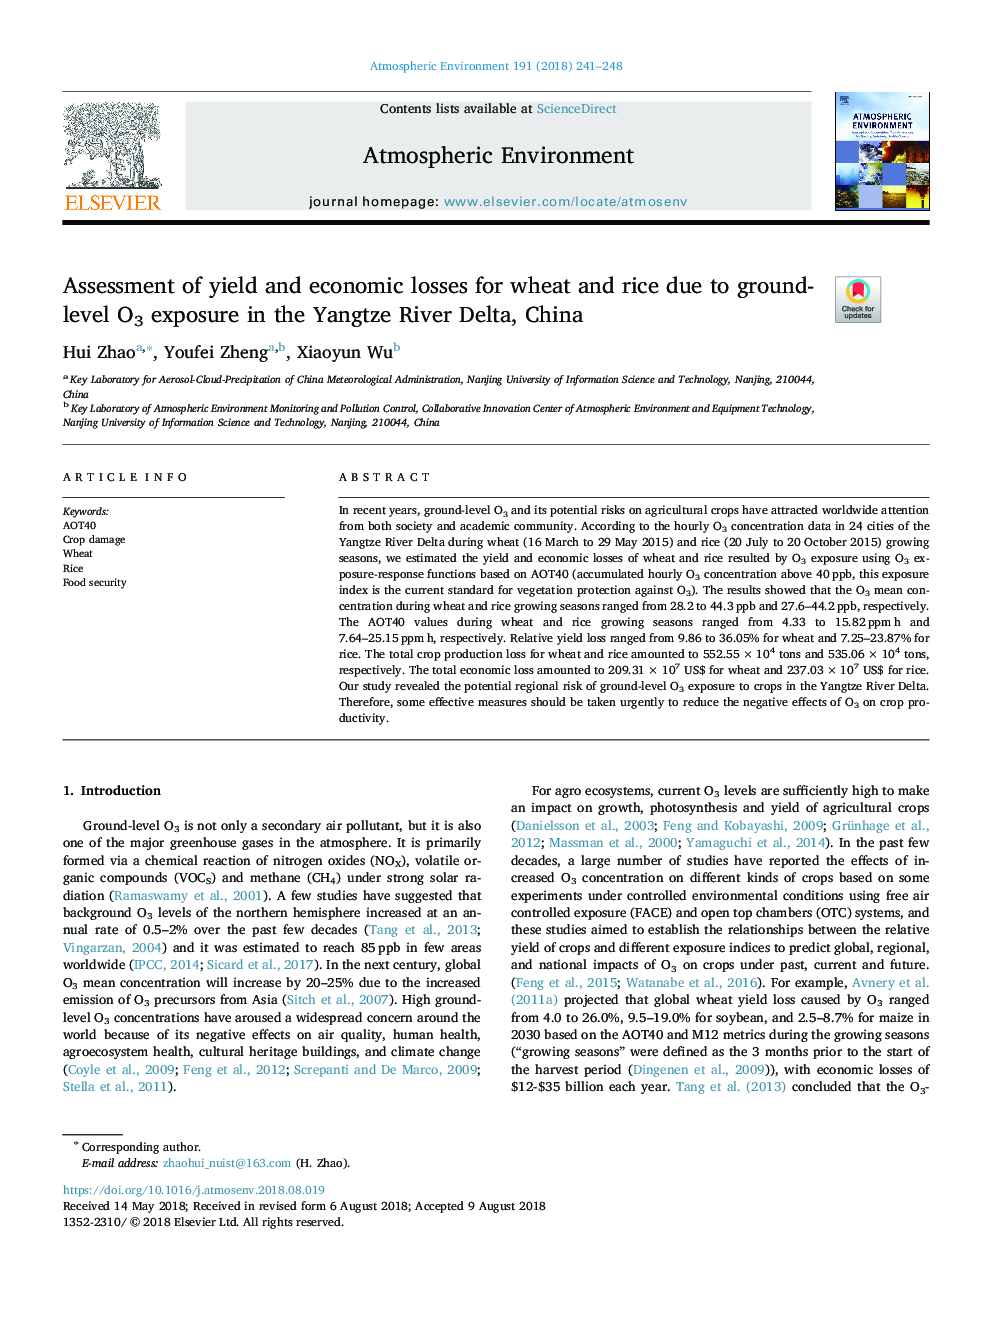 Assessment of yield and economic losses for wheat and rice due to ground-level O3 exposure in the Yangtze River Delta, China